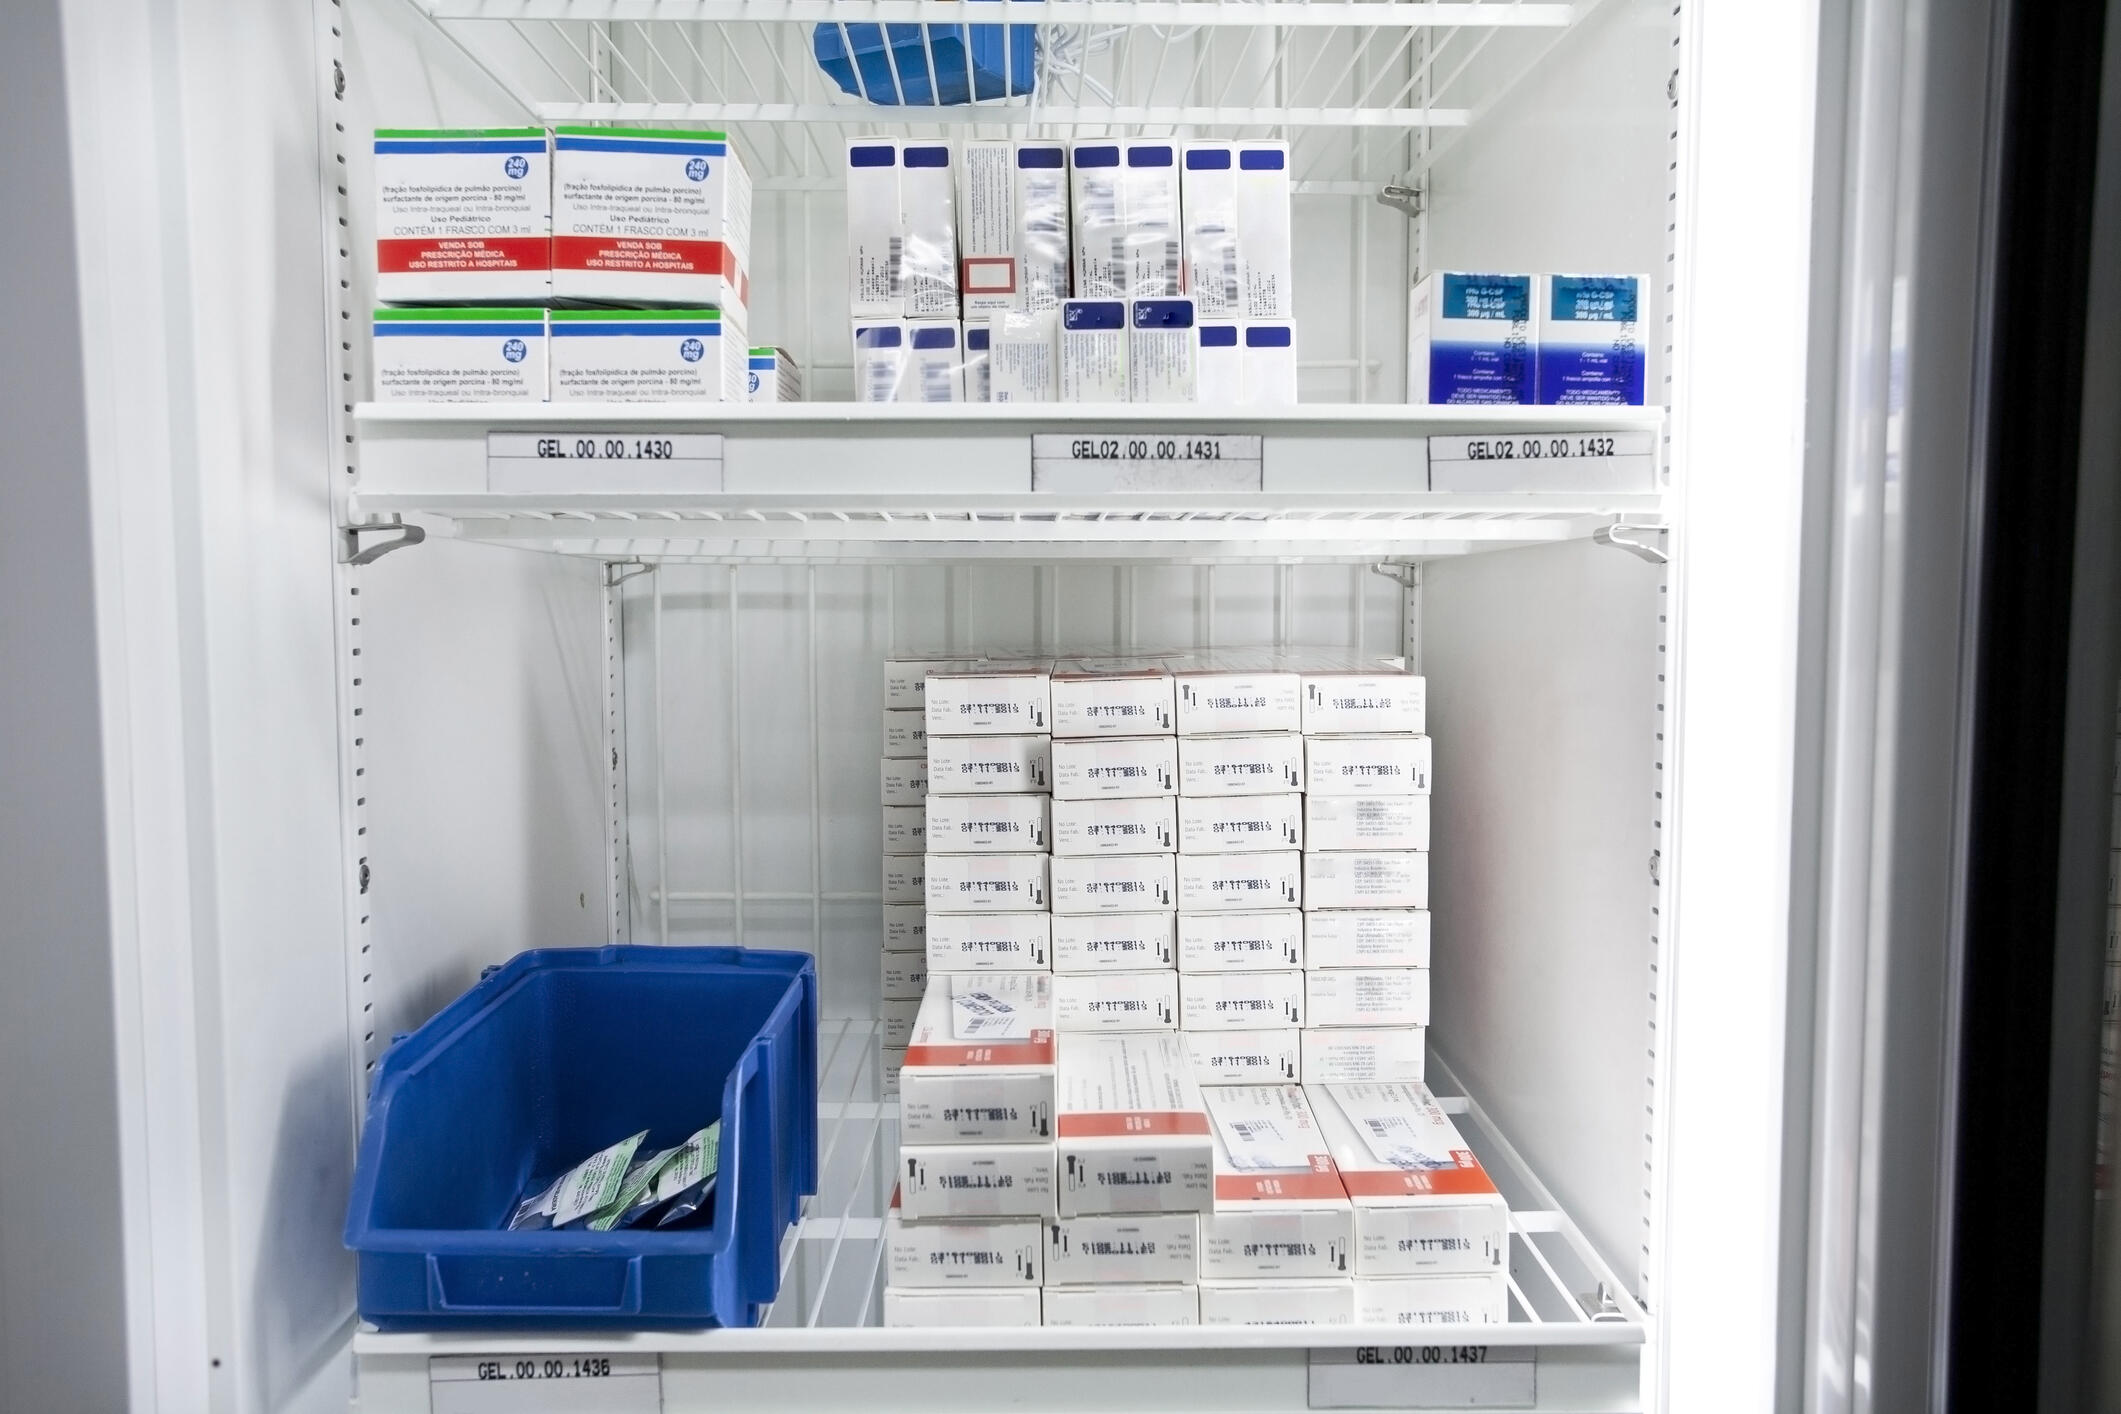 A photo of a vaccine refrigerator with stacks of vaccine boxes